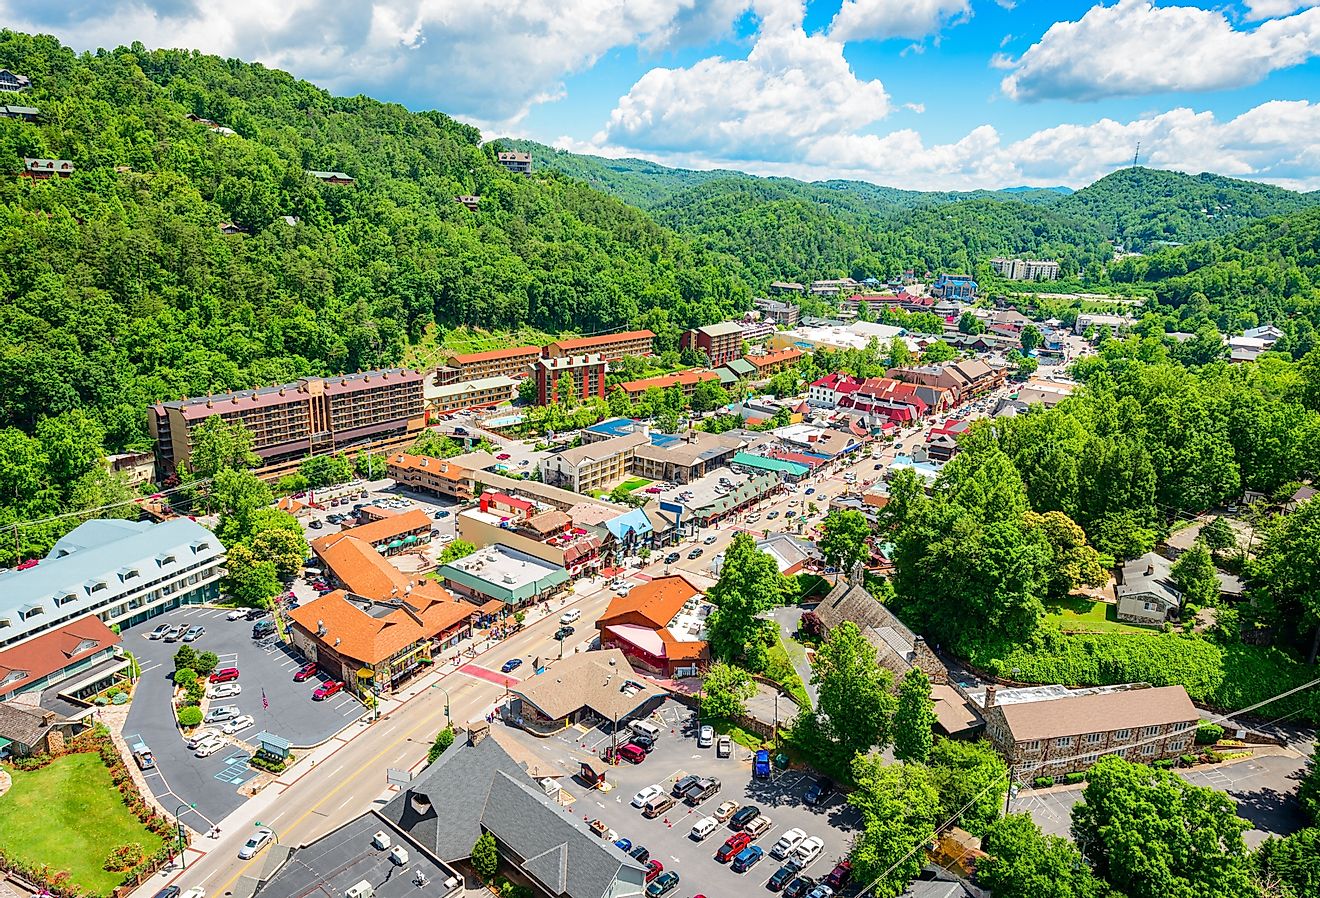 Gatlinburg, Tennessee, downtown viewed from above in the summer season.